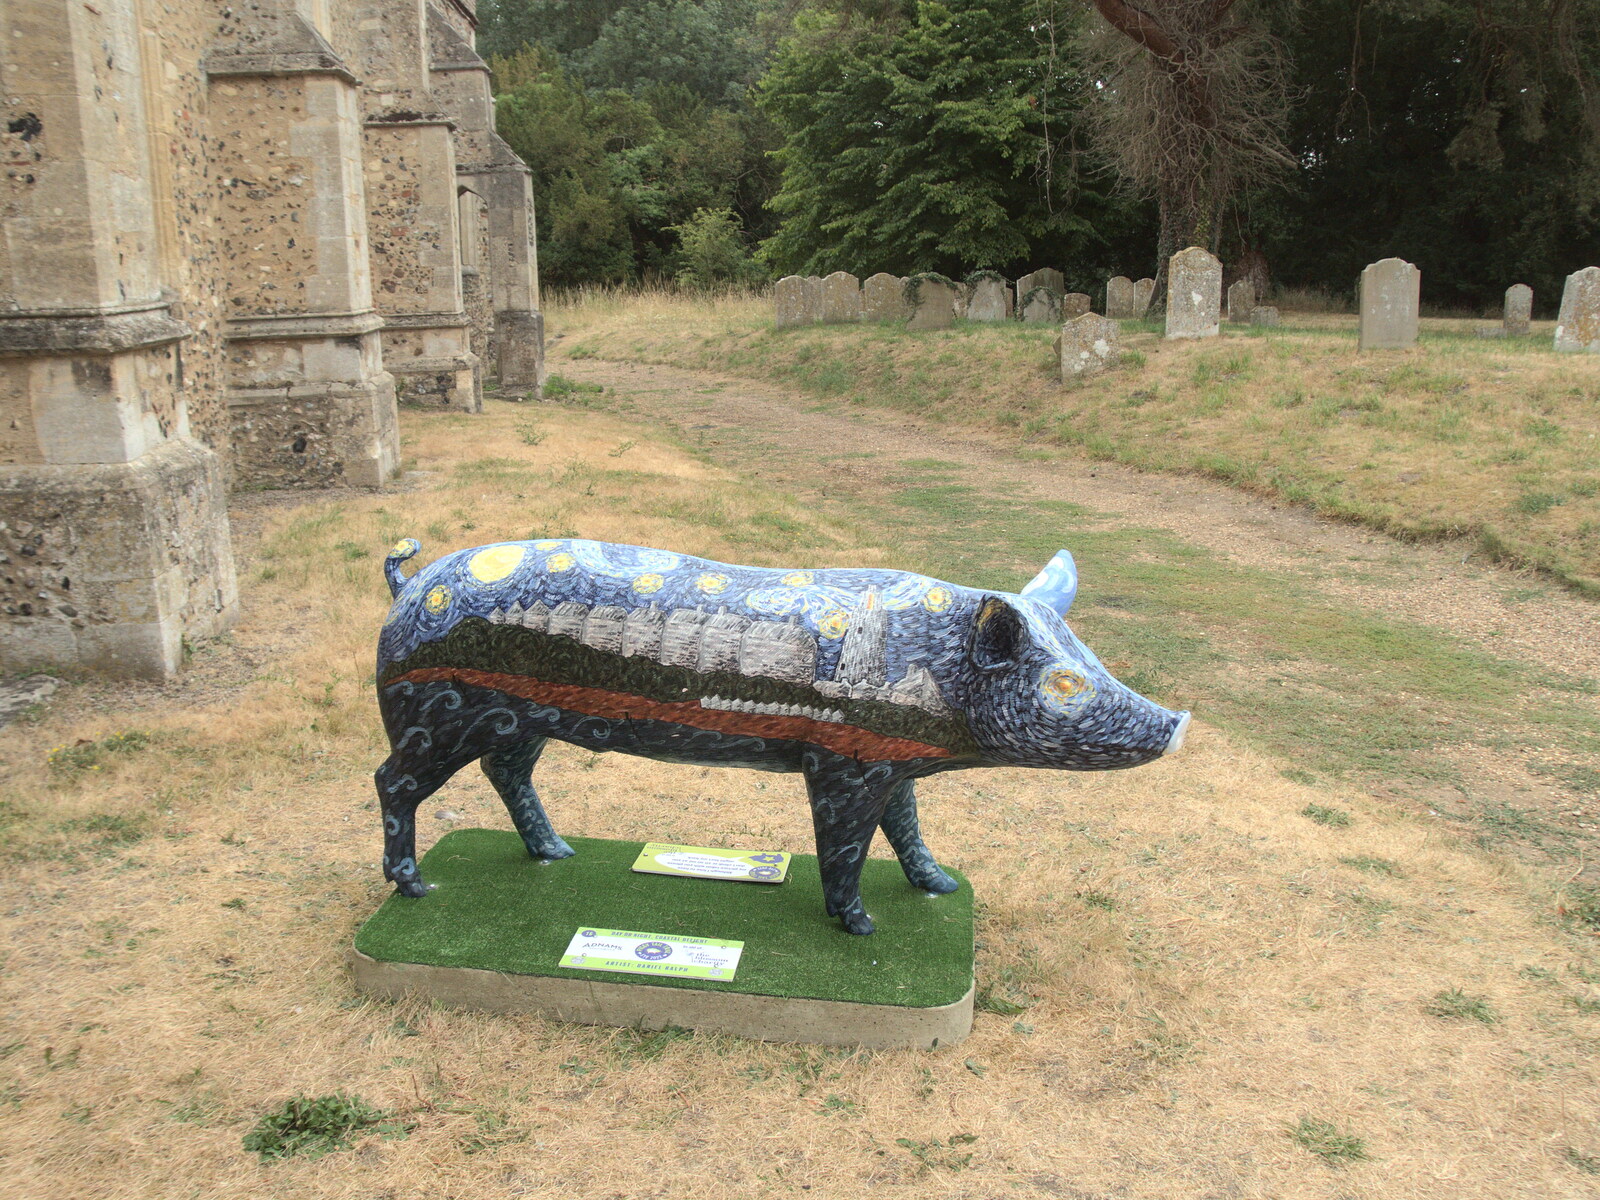 The Eye Piggy Tail Trail and Ipswich Dereliction, Suffolk - 29th July 2022: A pig in the style of Van Gogh's starry night 